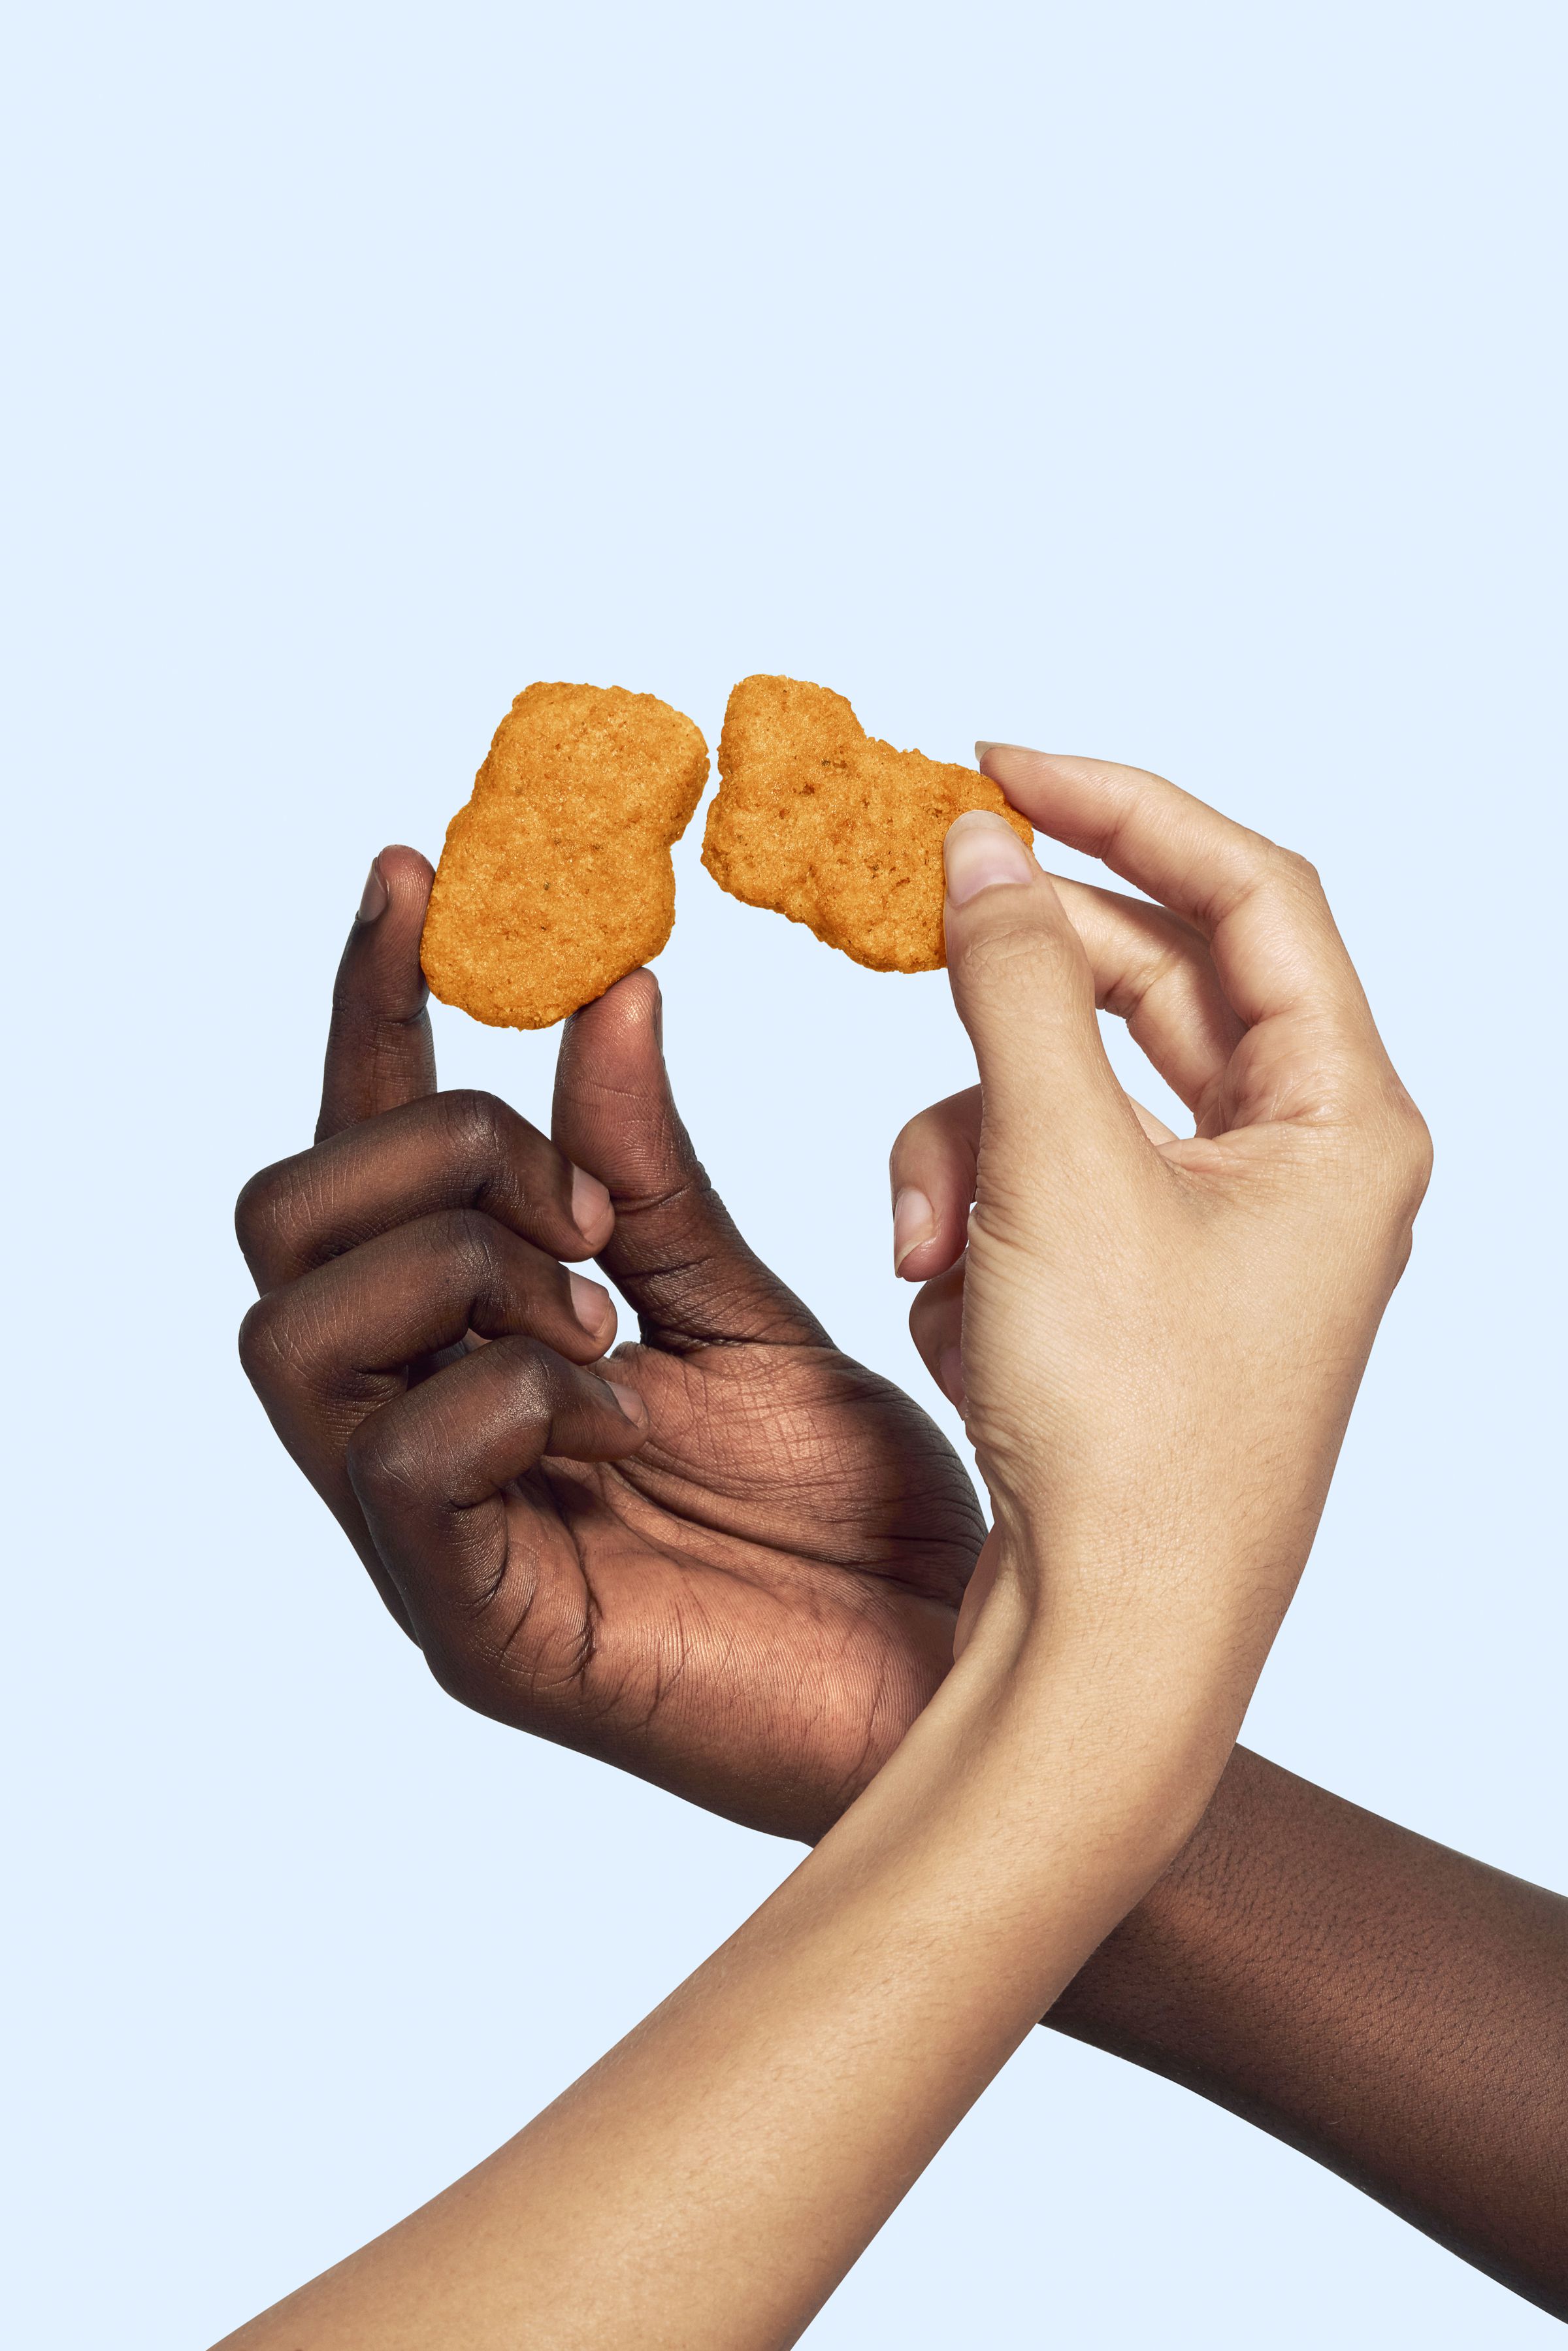 The hands of two people, crossed at the wrists, holding nuggets that are almost touching. 